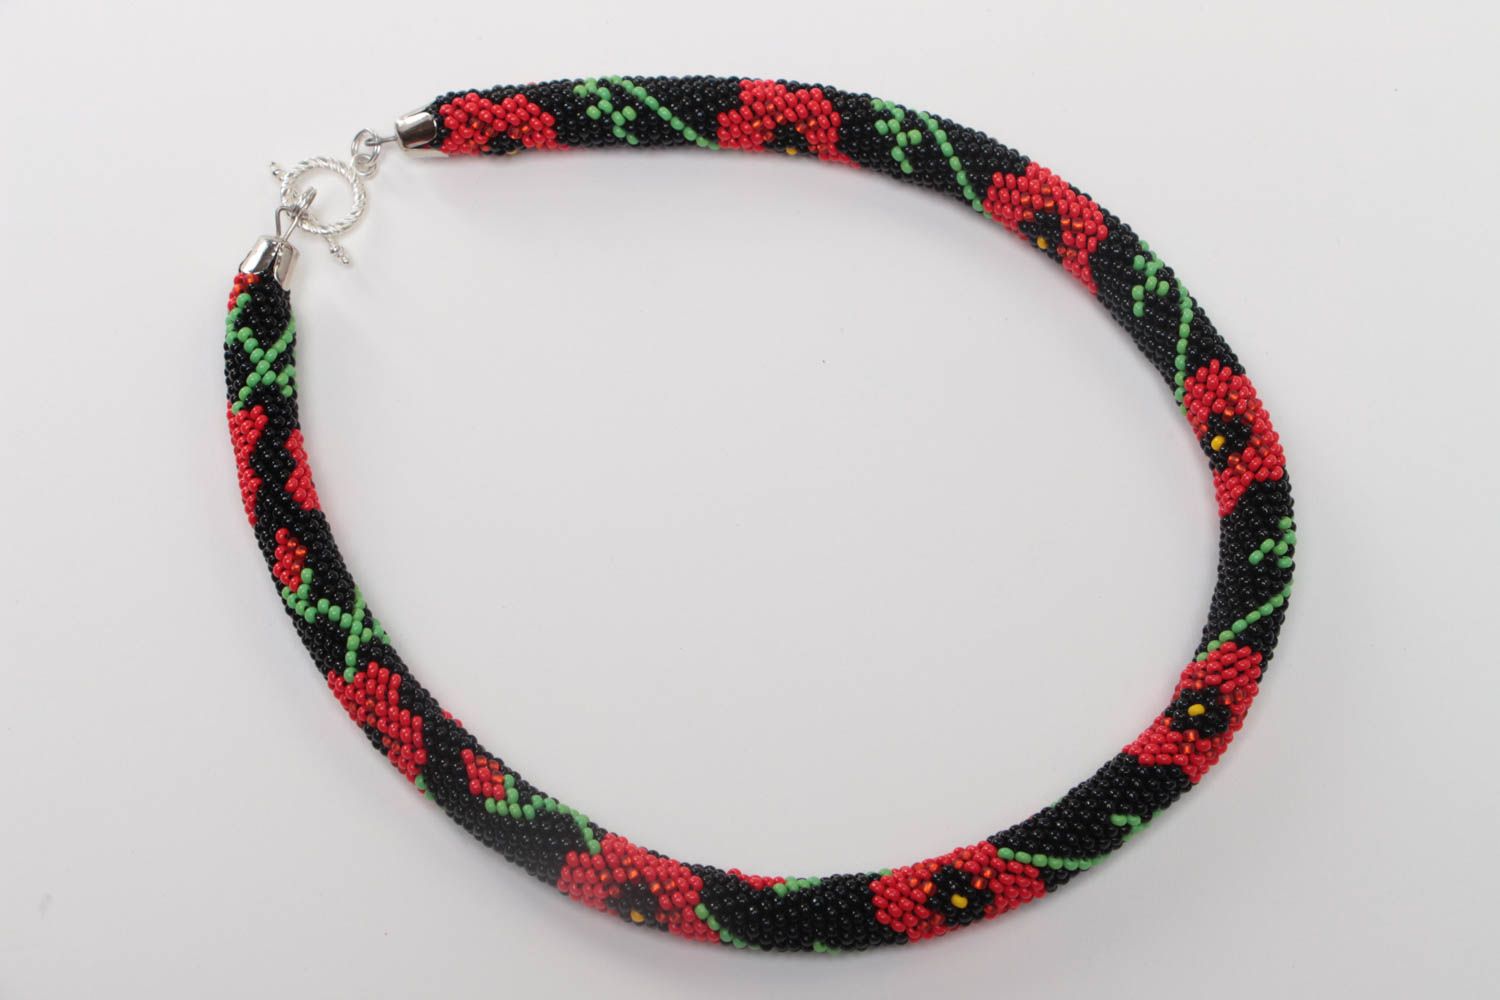 Handmade black beaded cord necklace with bright floral pattern in ethnic style photo 2